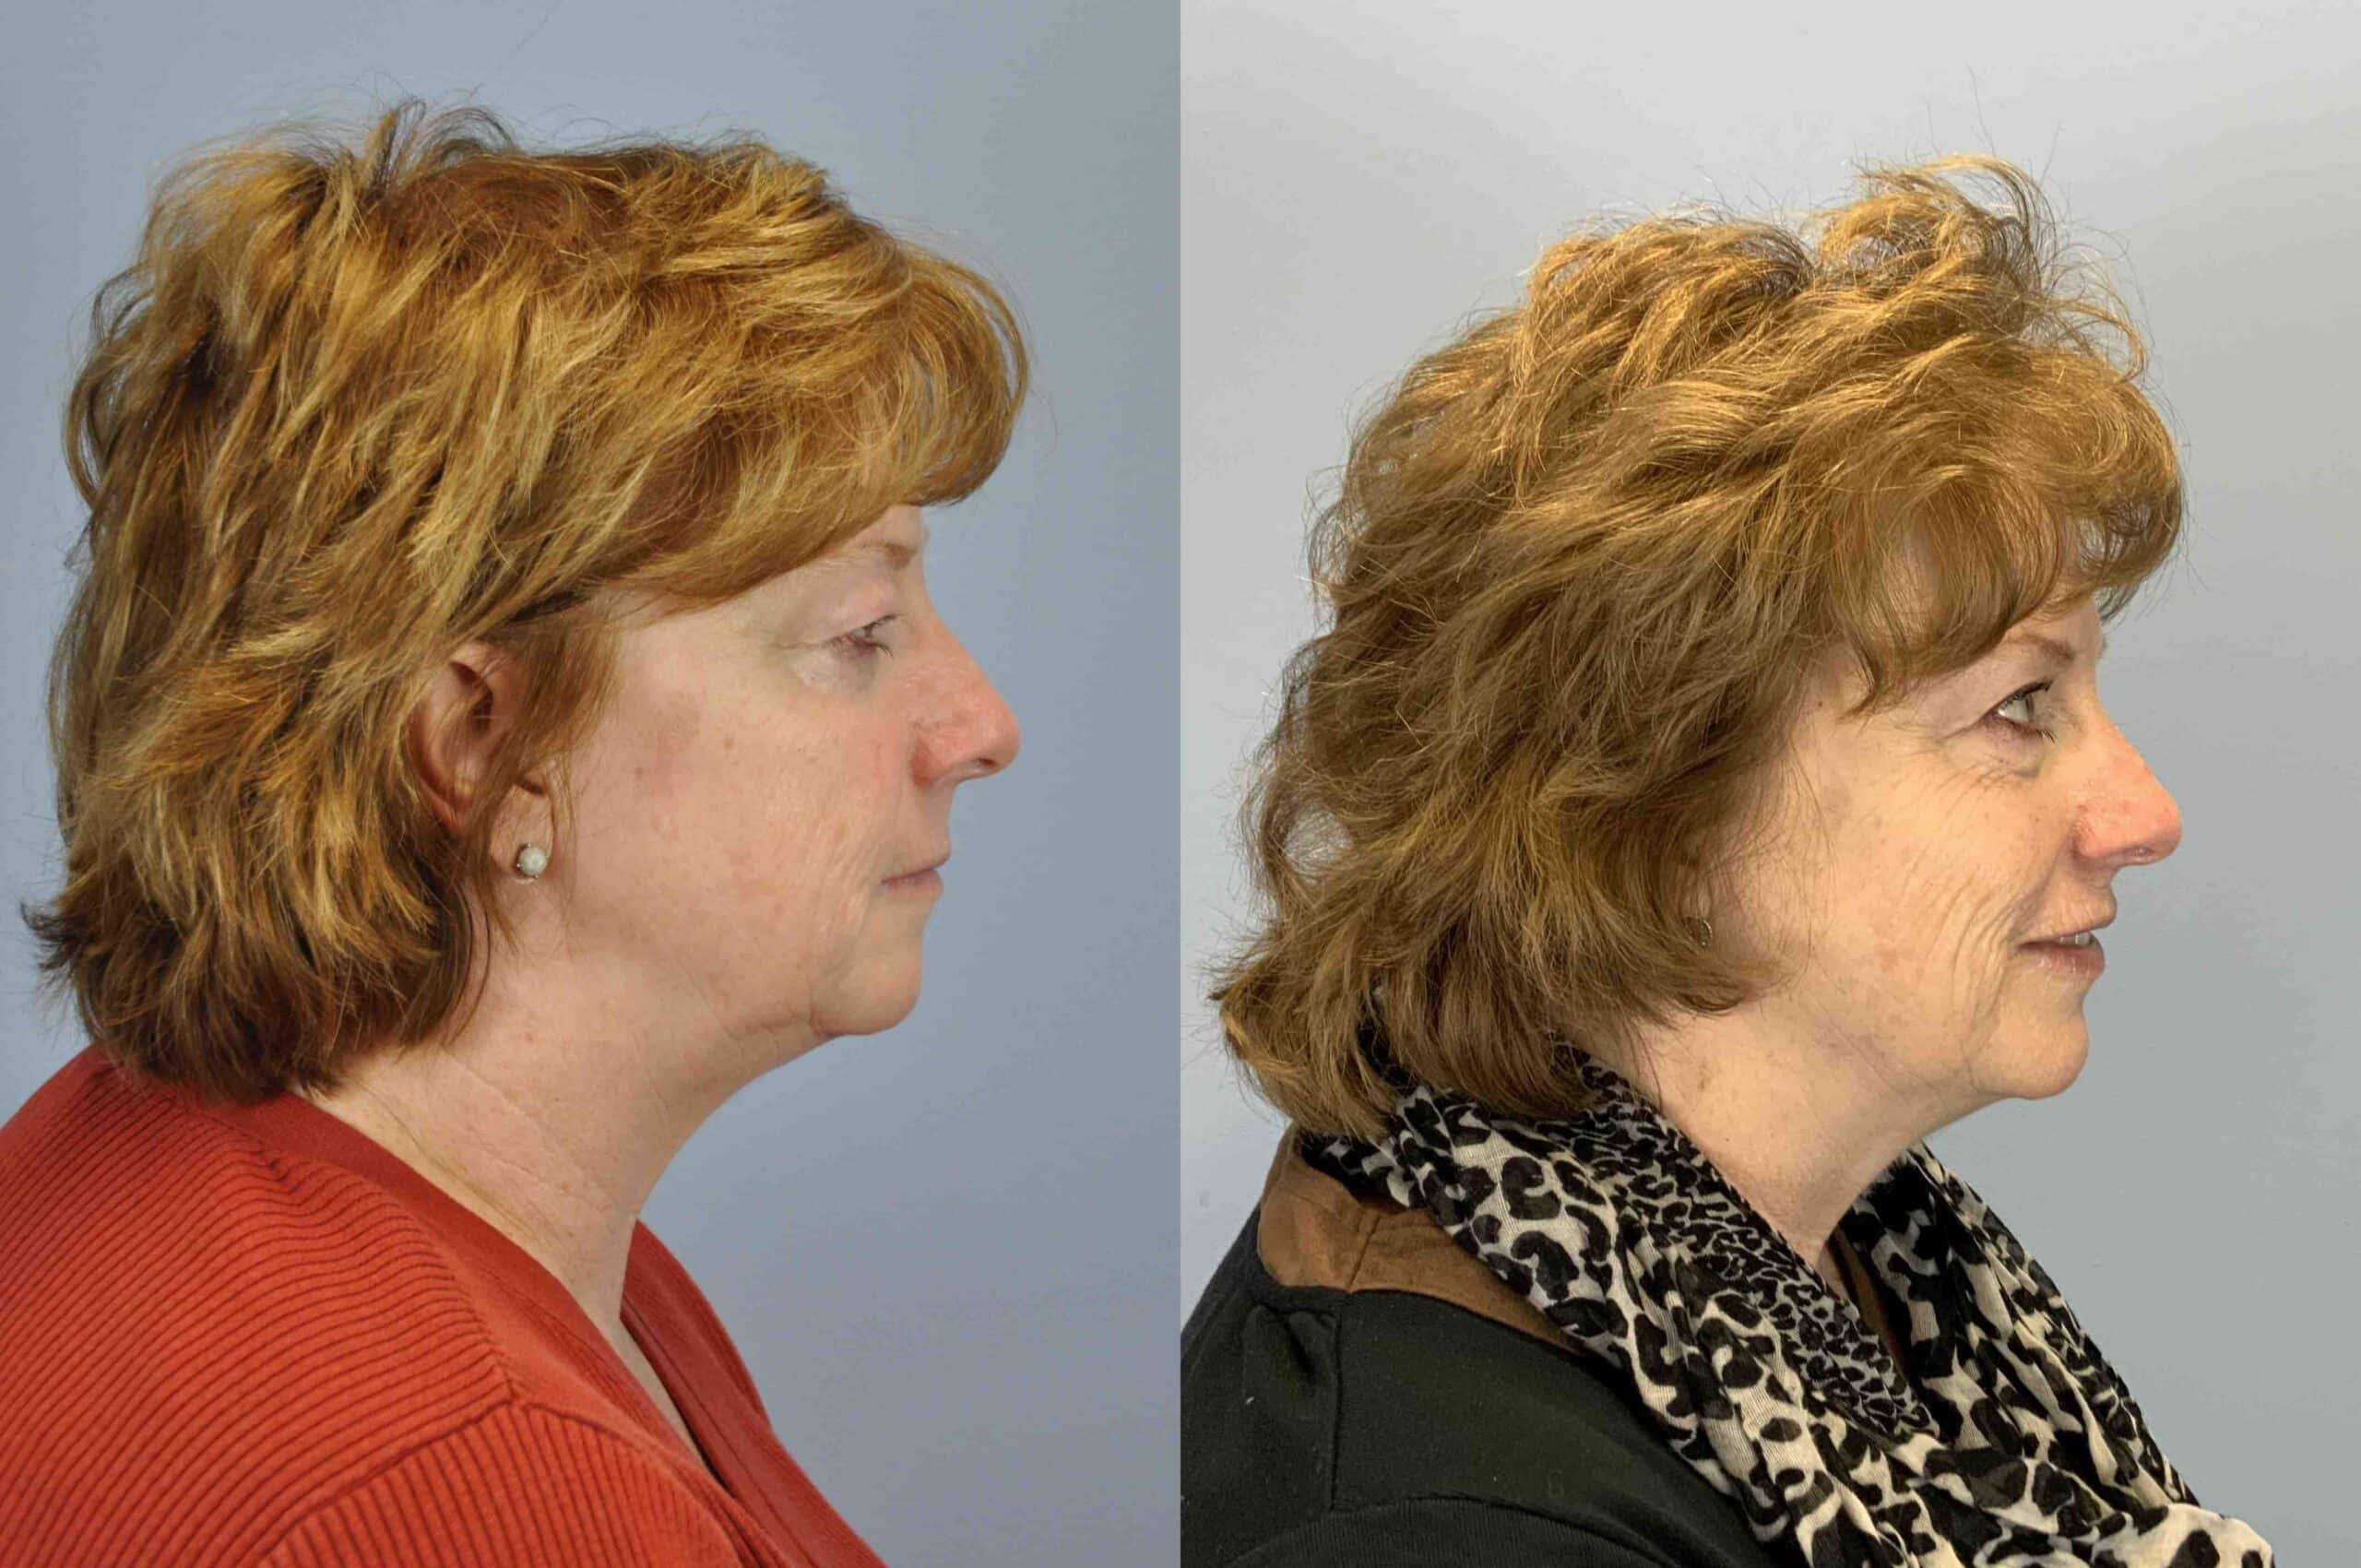 Before and after, 6 mo post op from Upper Blepharoplasty, Levator Ptosis (side view)